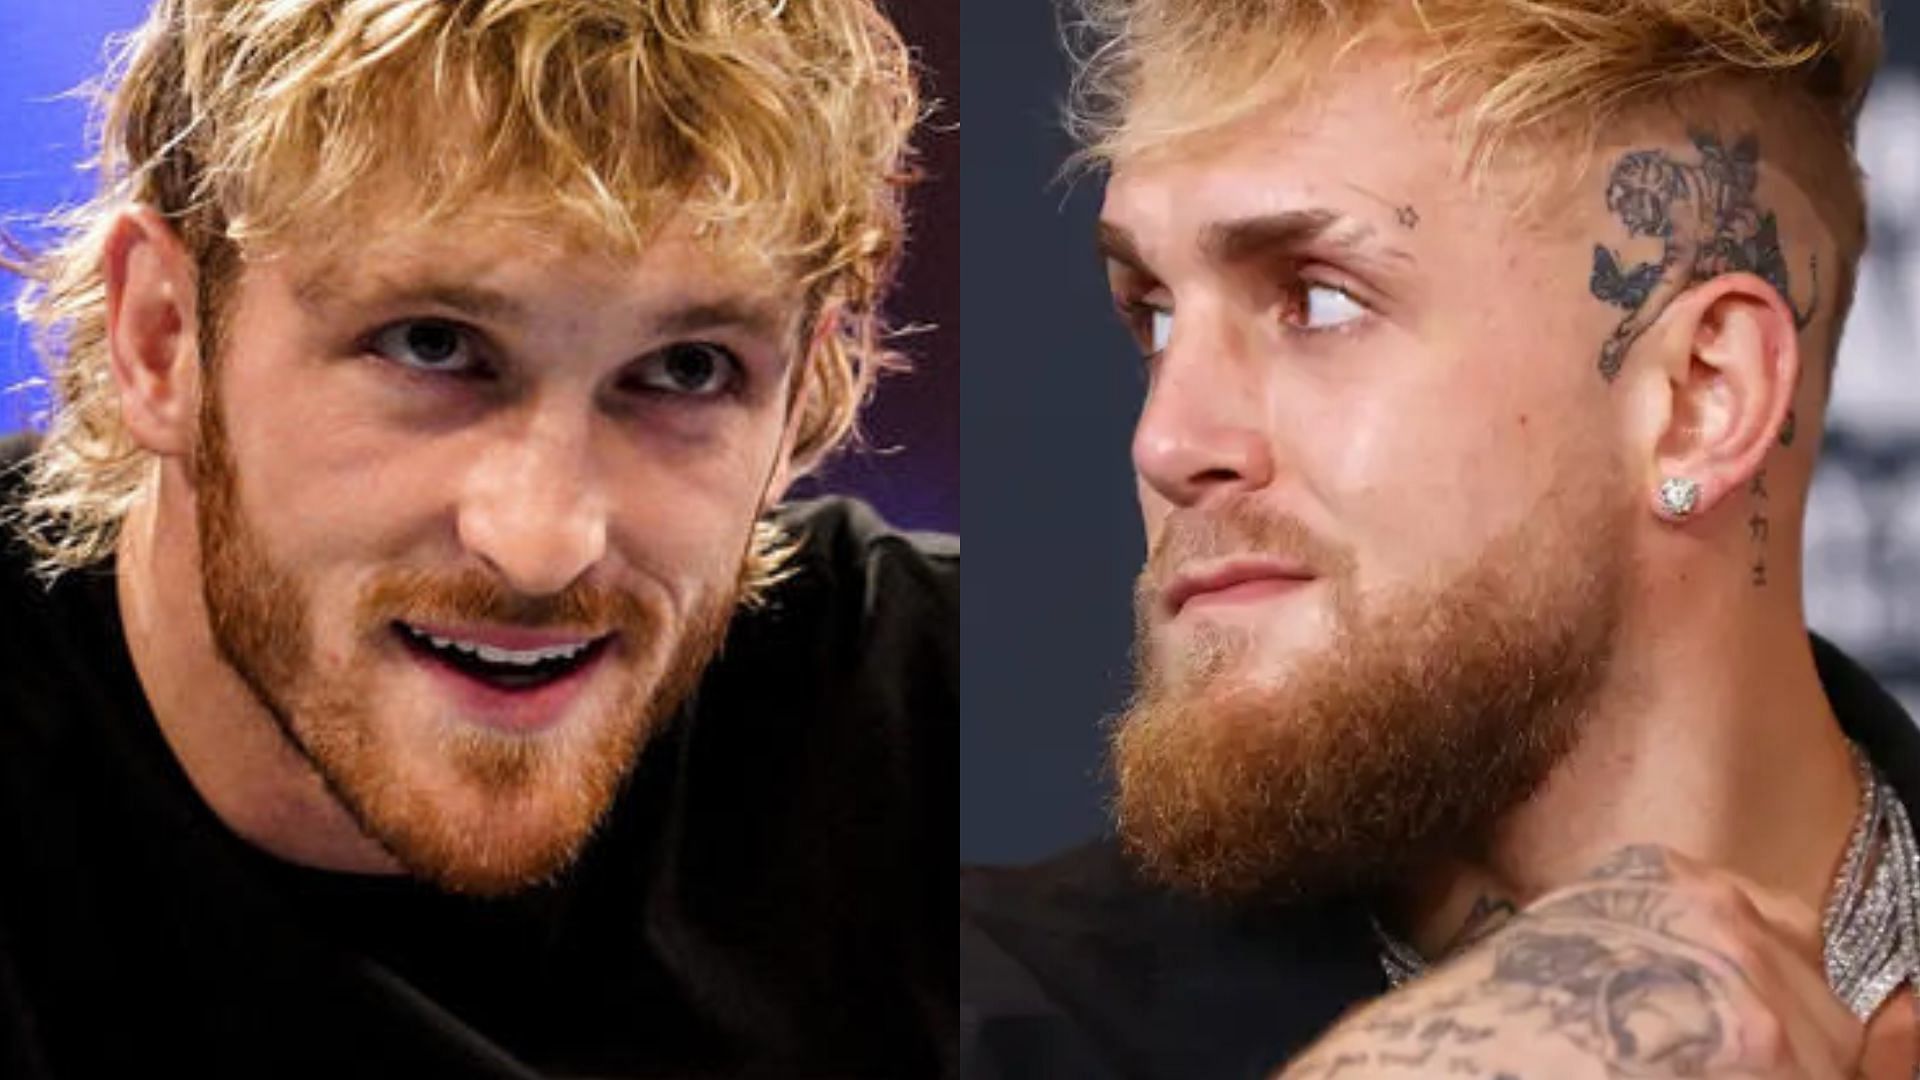 Current WWE champion believes Logan Paul should be humbled, reacts to ...